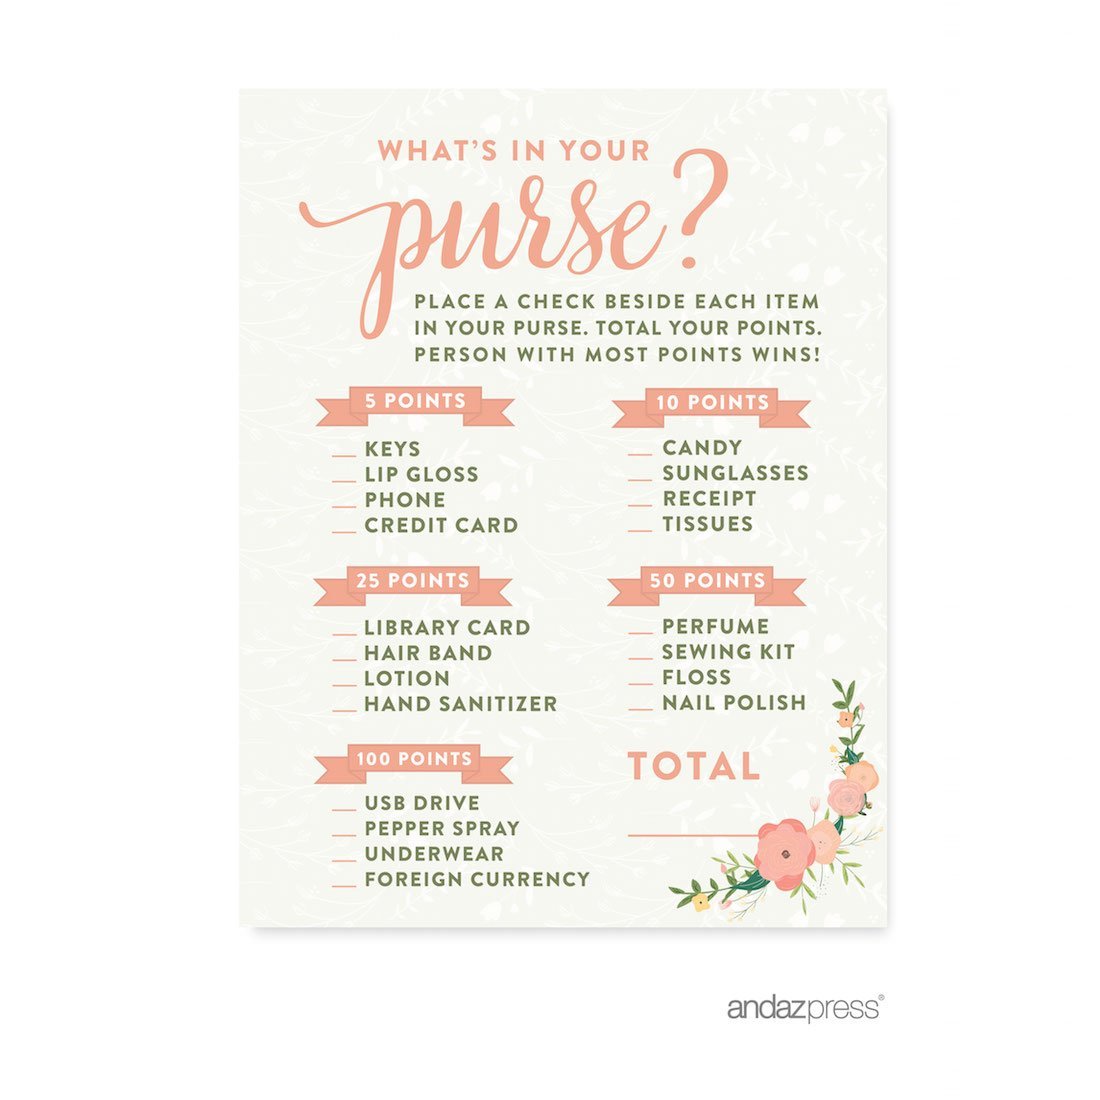 What's In Your Purse?